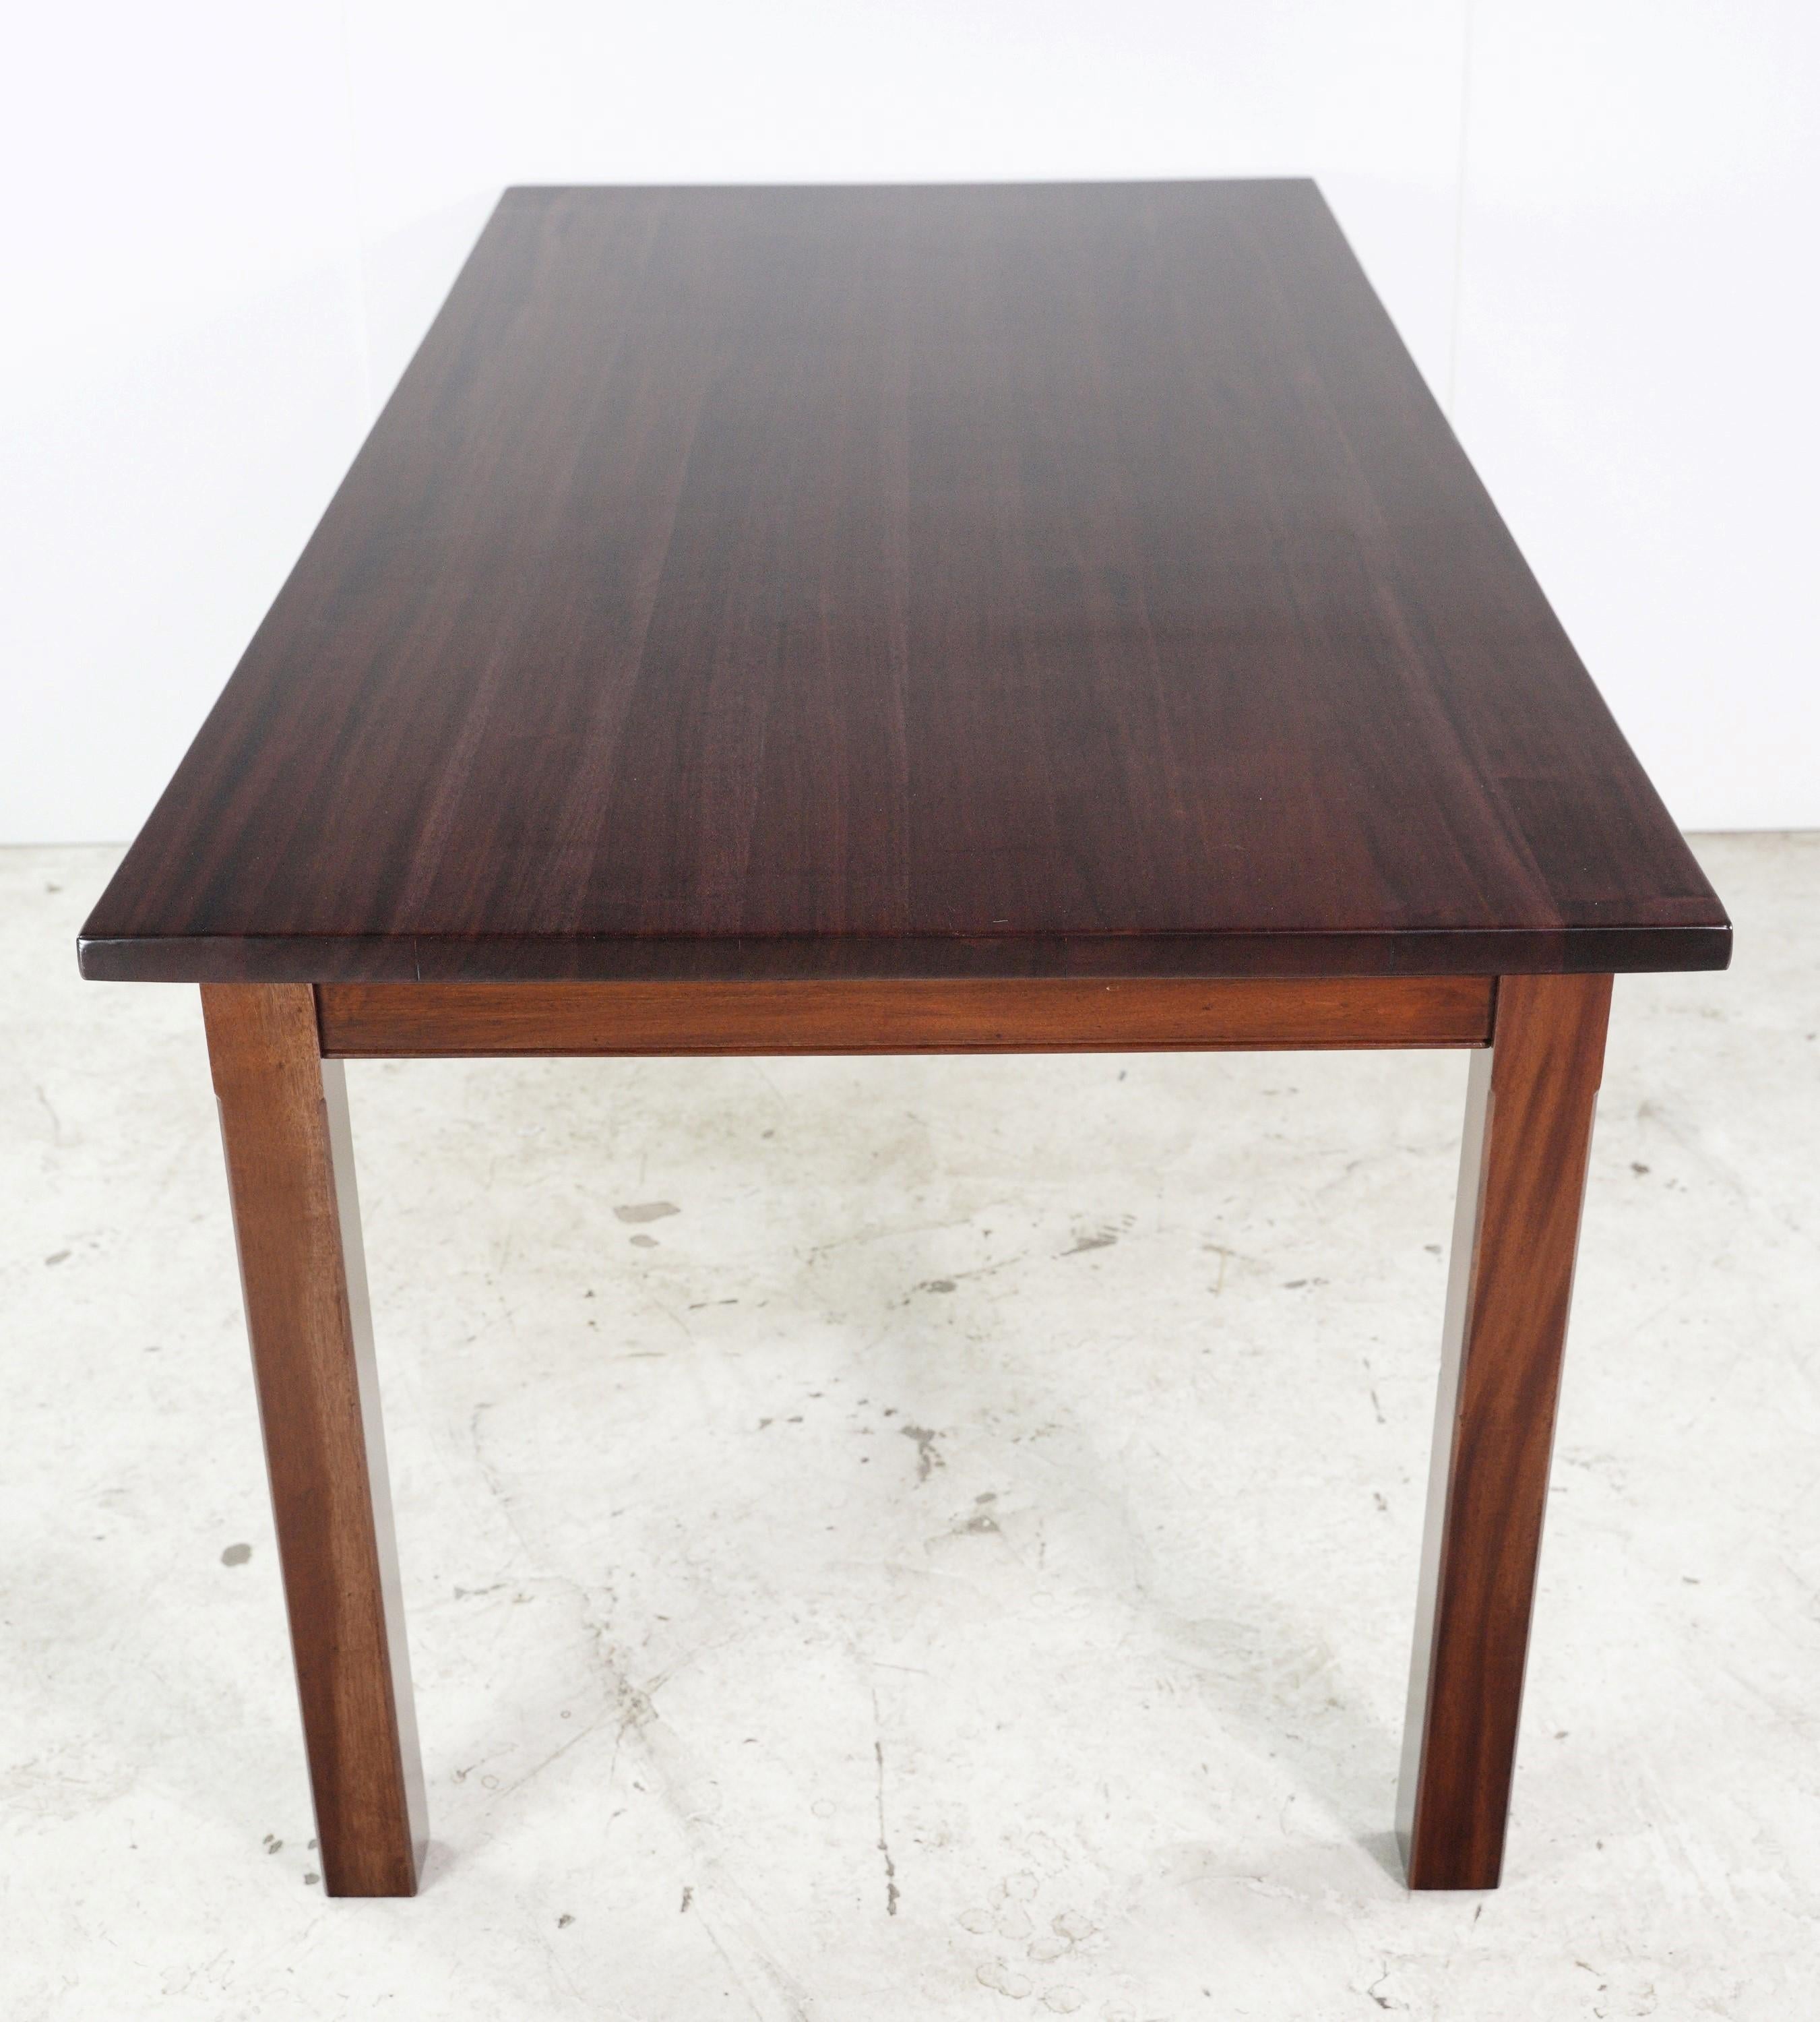 Meticulously made by hand, the reclaimed mahogany square legs dining room table embodies both sustainability and elegance. Its unique blend of rustic charm and modern design creates a captivating focal point for gatherings. This table is ready to